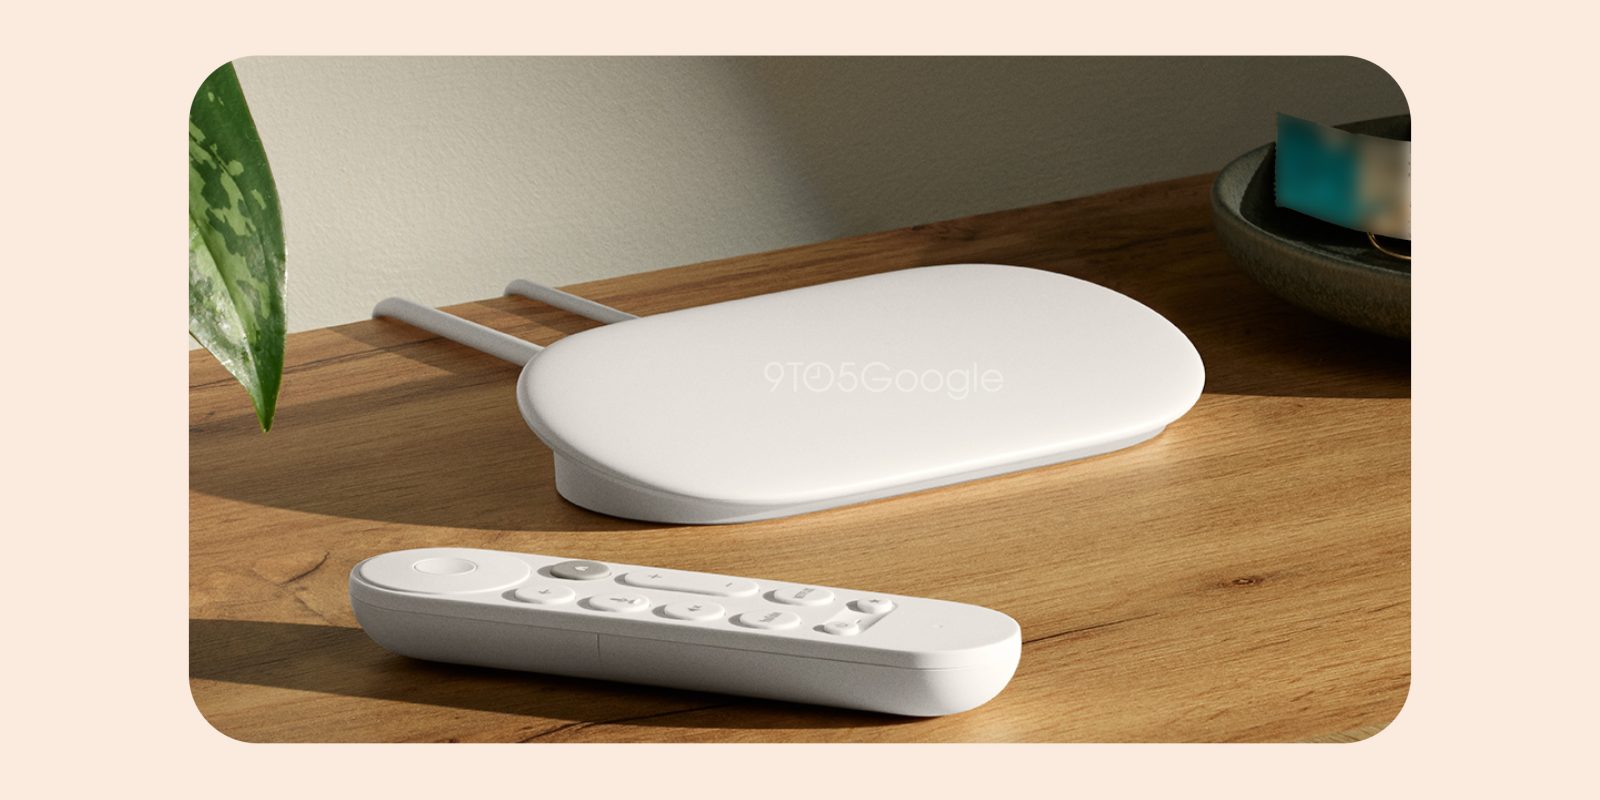 This ‘Google TV Streamer’ set-top field is what comes after Chromecast [Gallery]